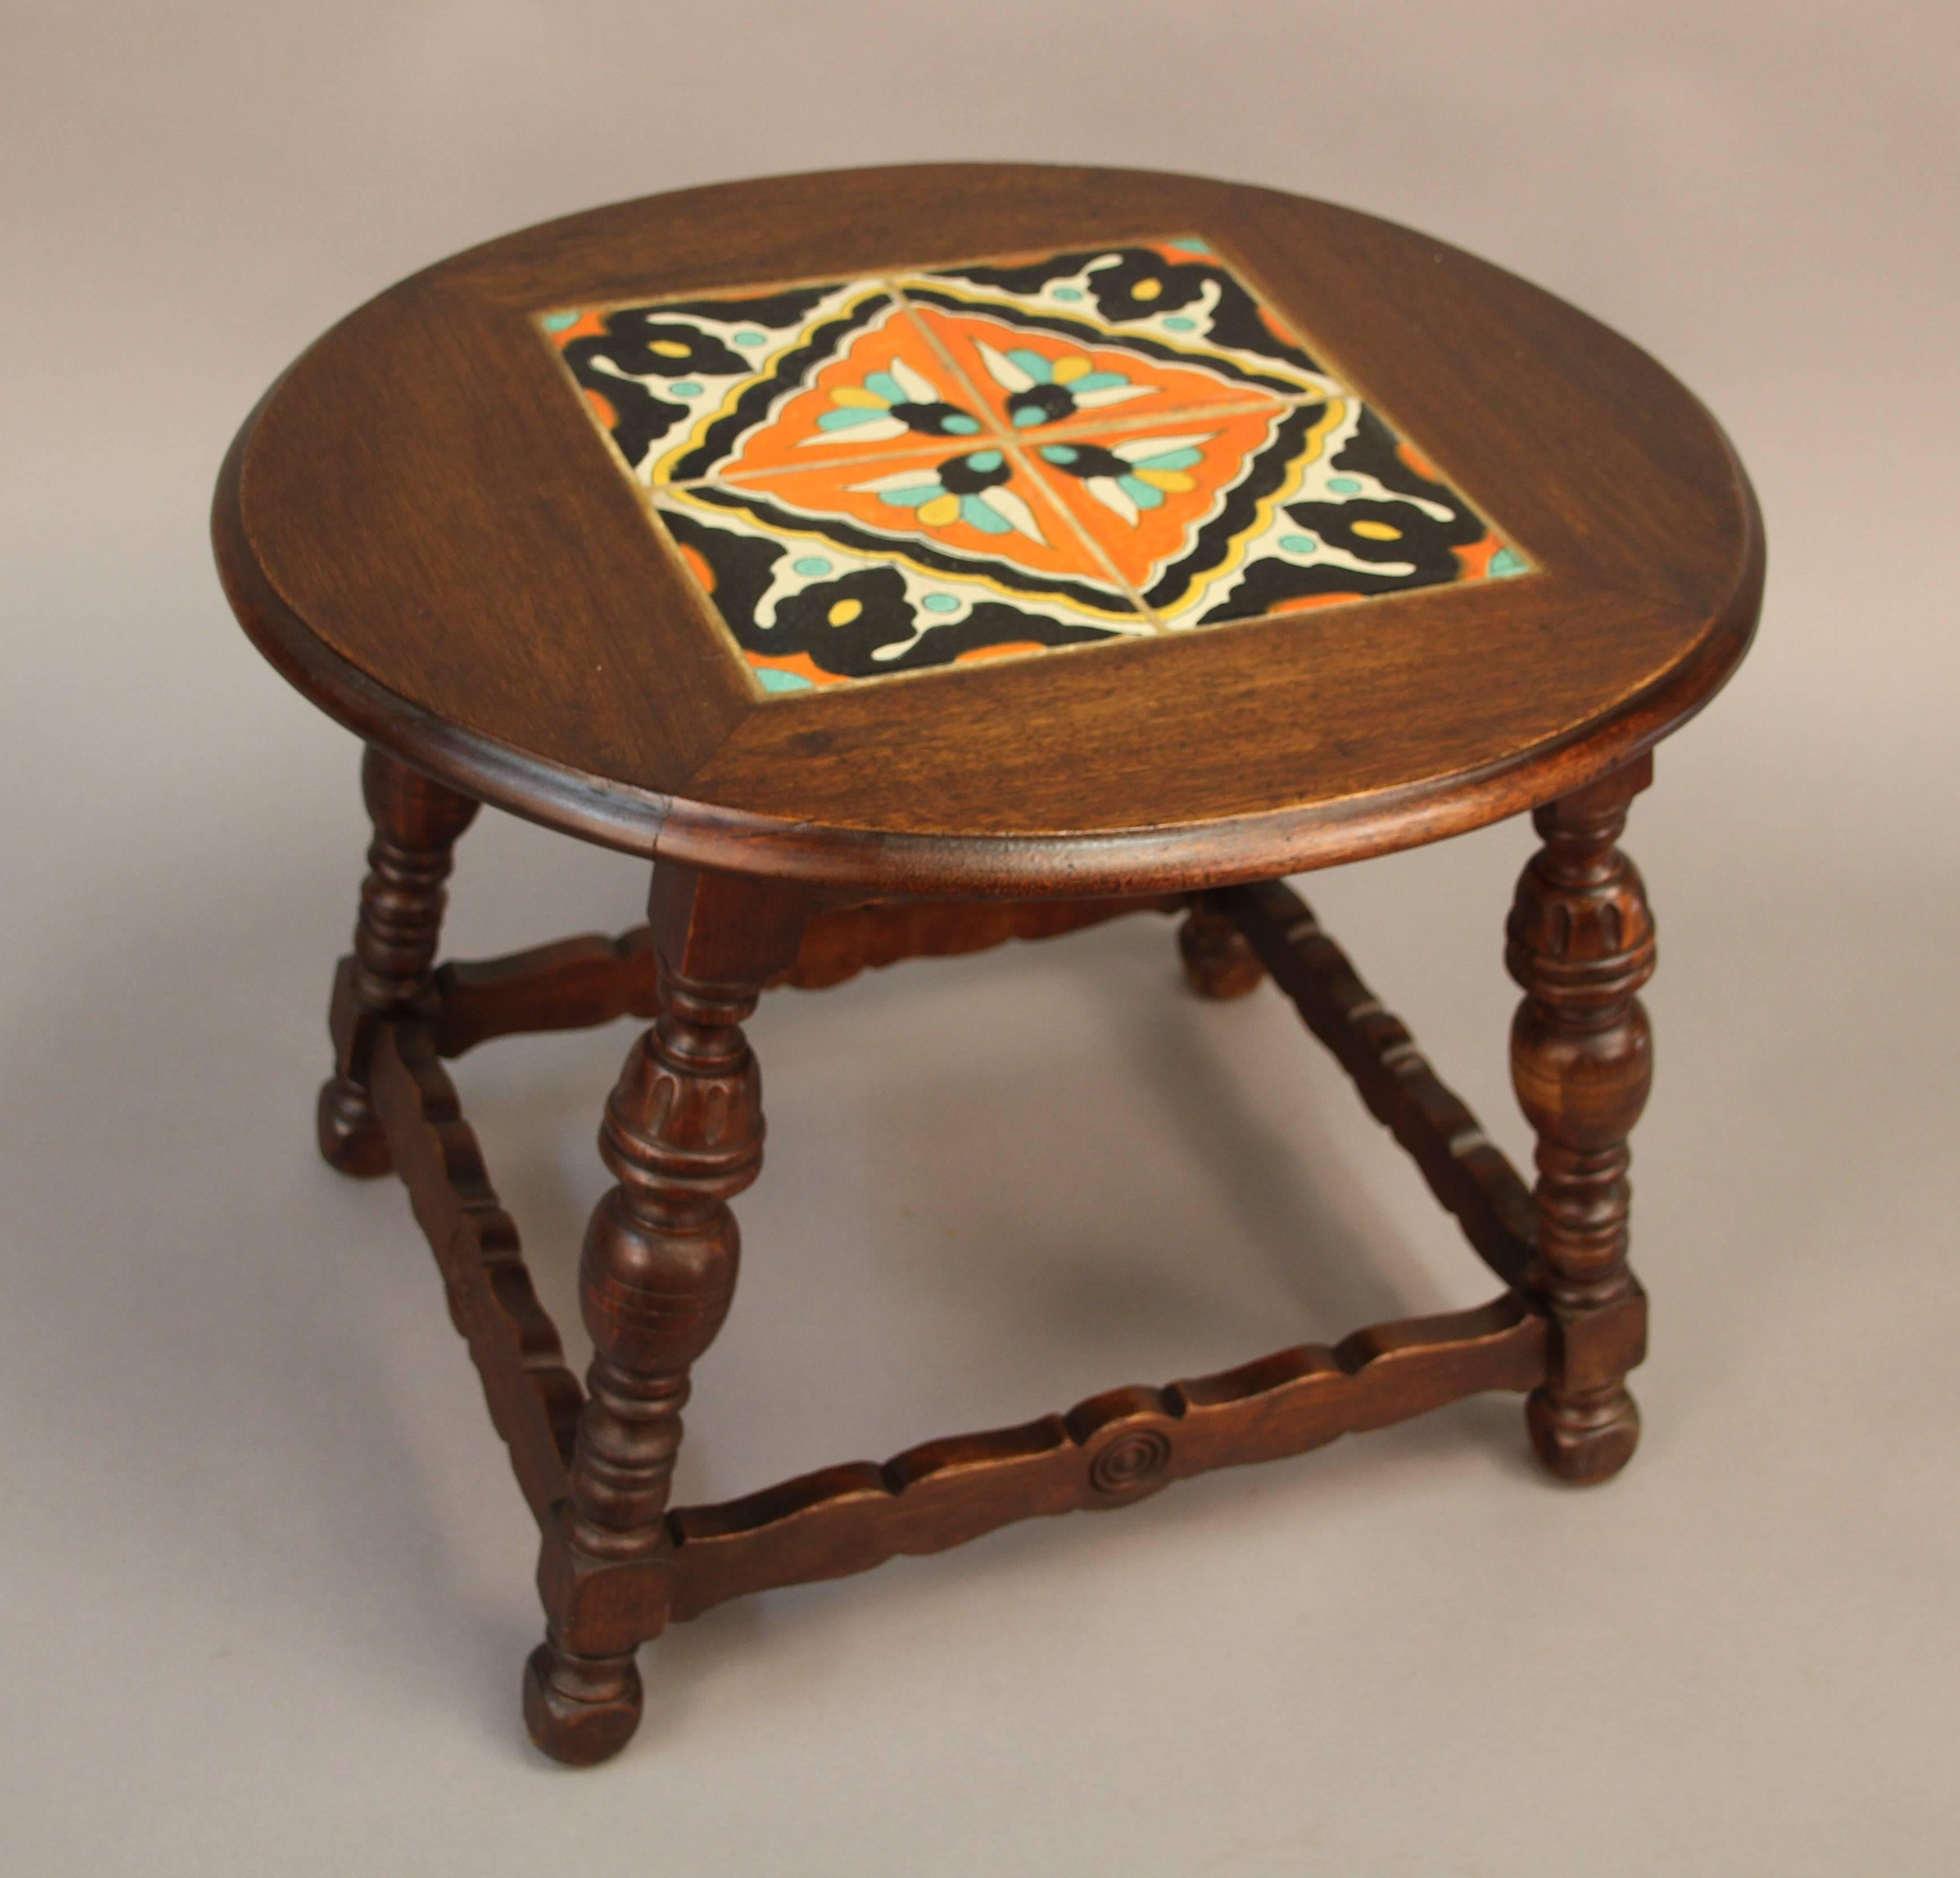 Spanish Colonial Round California Tile Table with Four Tiles